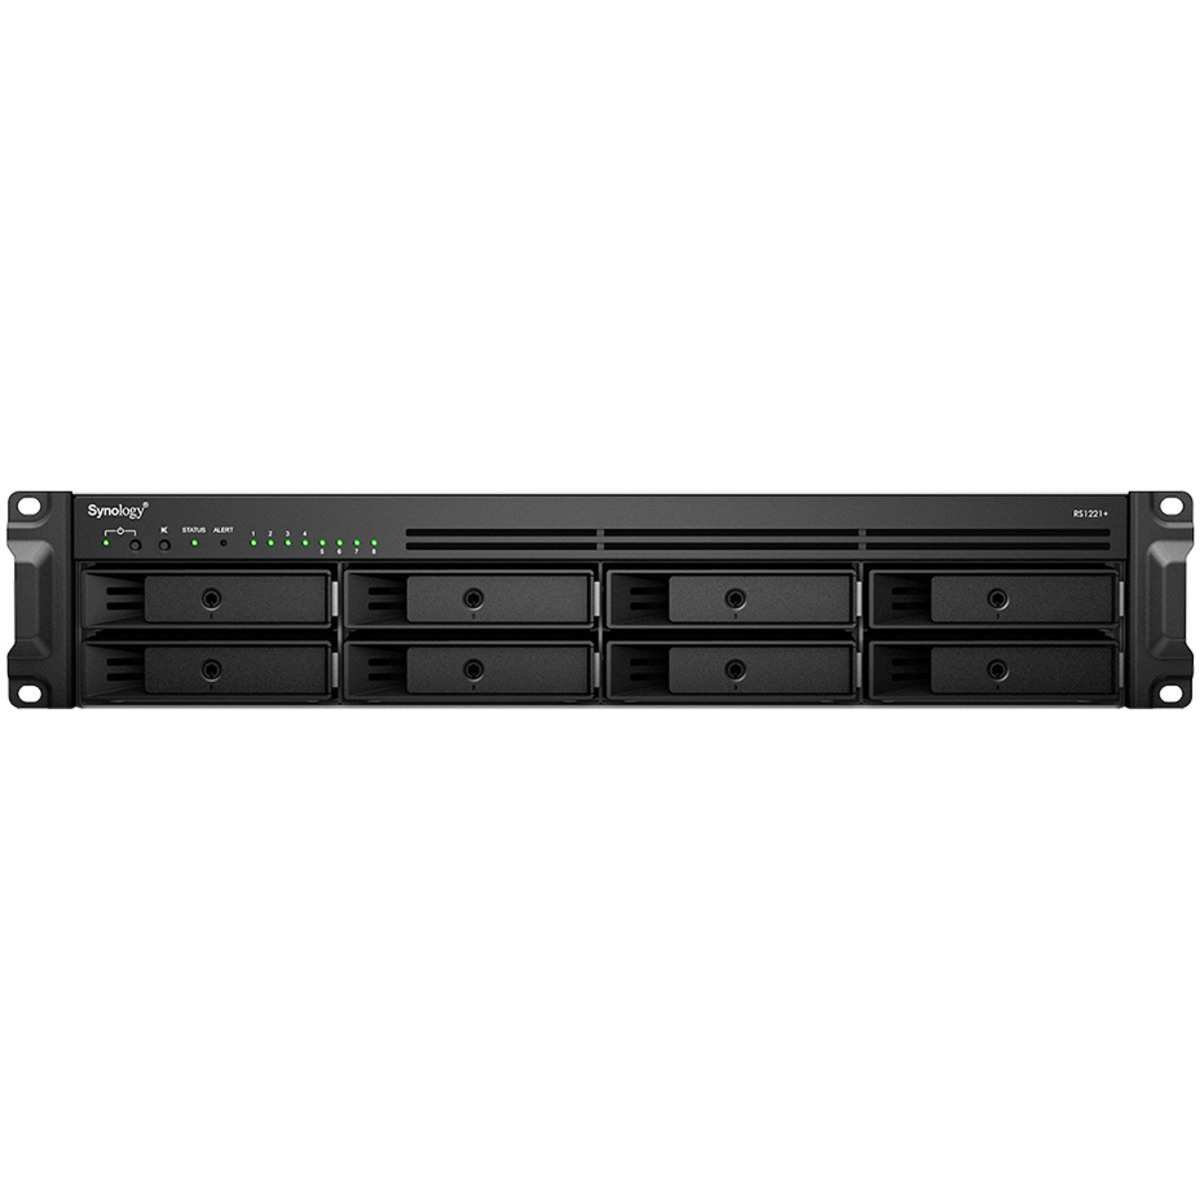 buy $2533 Synology RackStation RS1221+ 32tb RackMount NAS - Network Attached Storage Device 8x4000gb Western Digital Blue WD40EZRZ 3.5 5400rpm SATA 6Gb/s HDD CONSUMER Class Drives Installed - Burn-In Tested - nas headquarters buy network attached storage server device das new raid-5 free shipping usa christmas new year holiday sale RackStation RS1221+